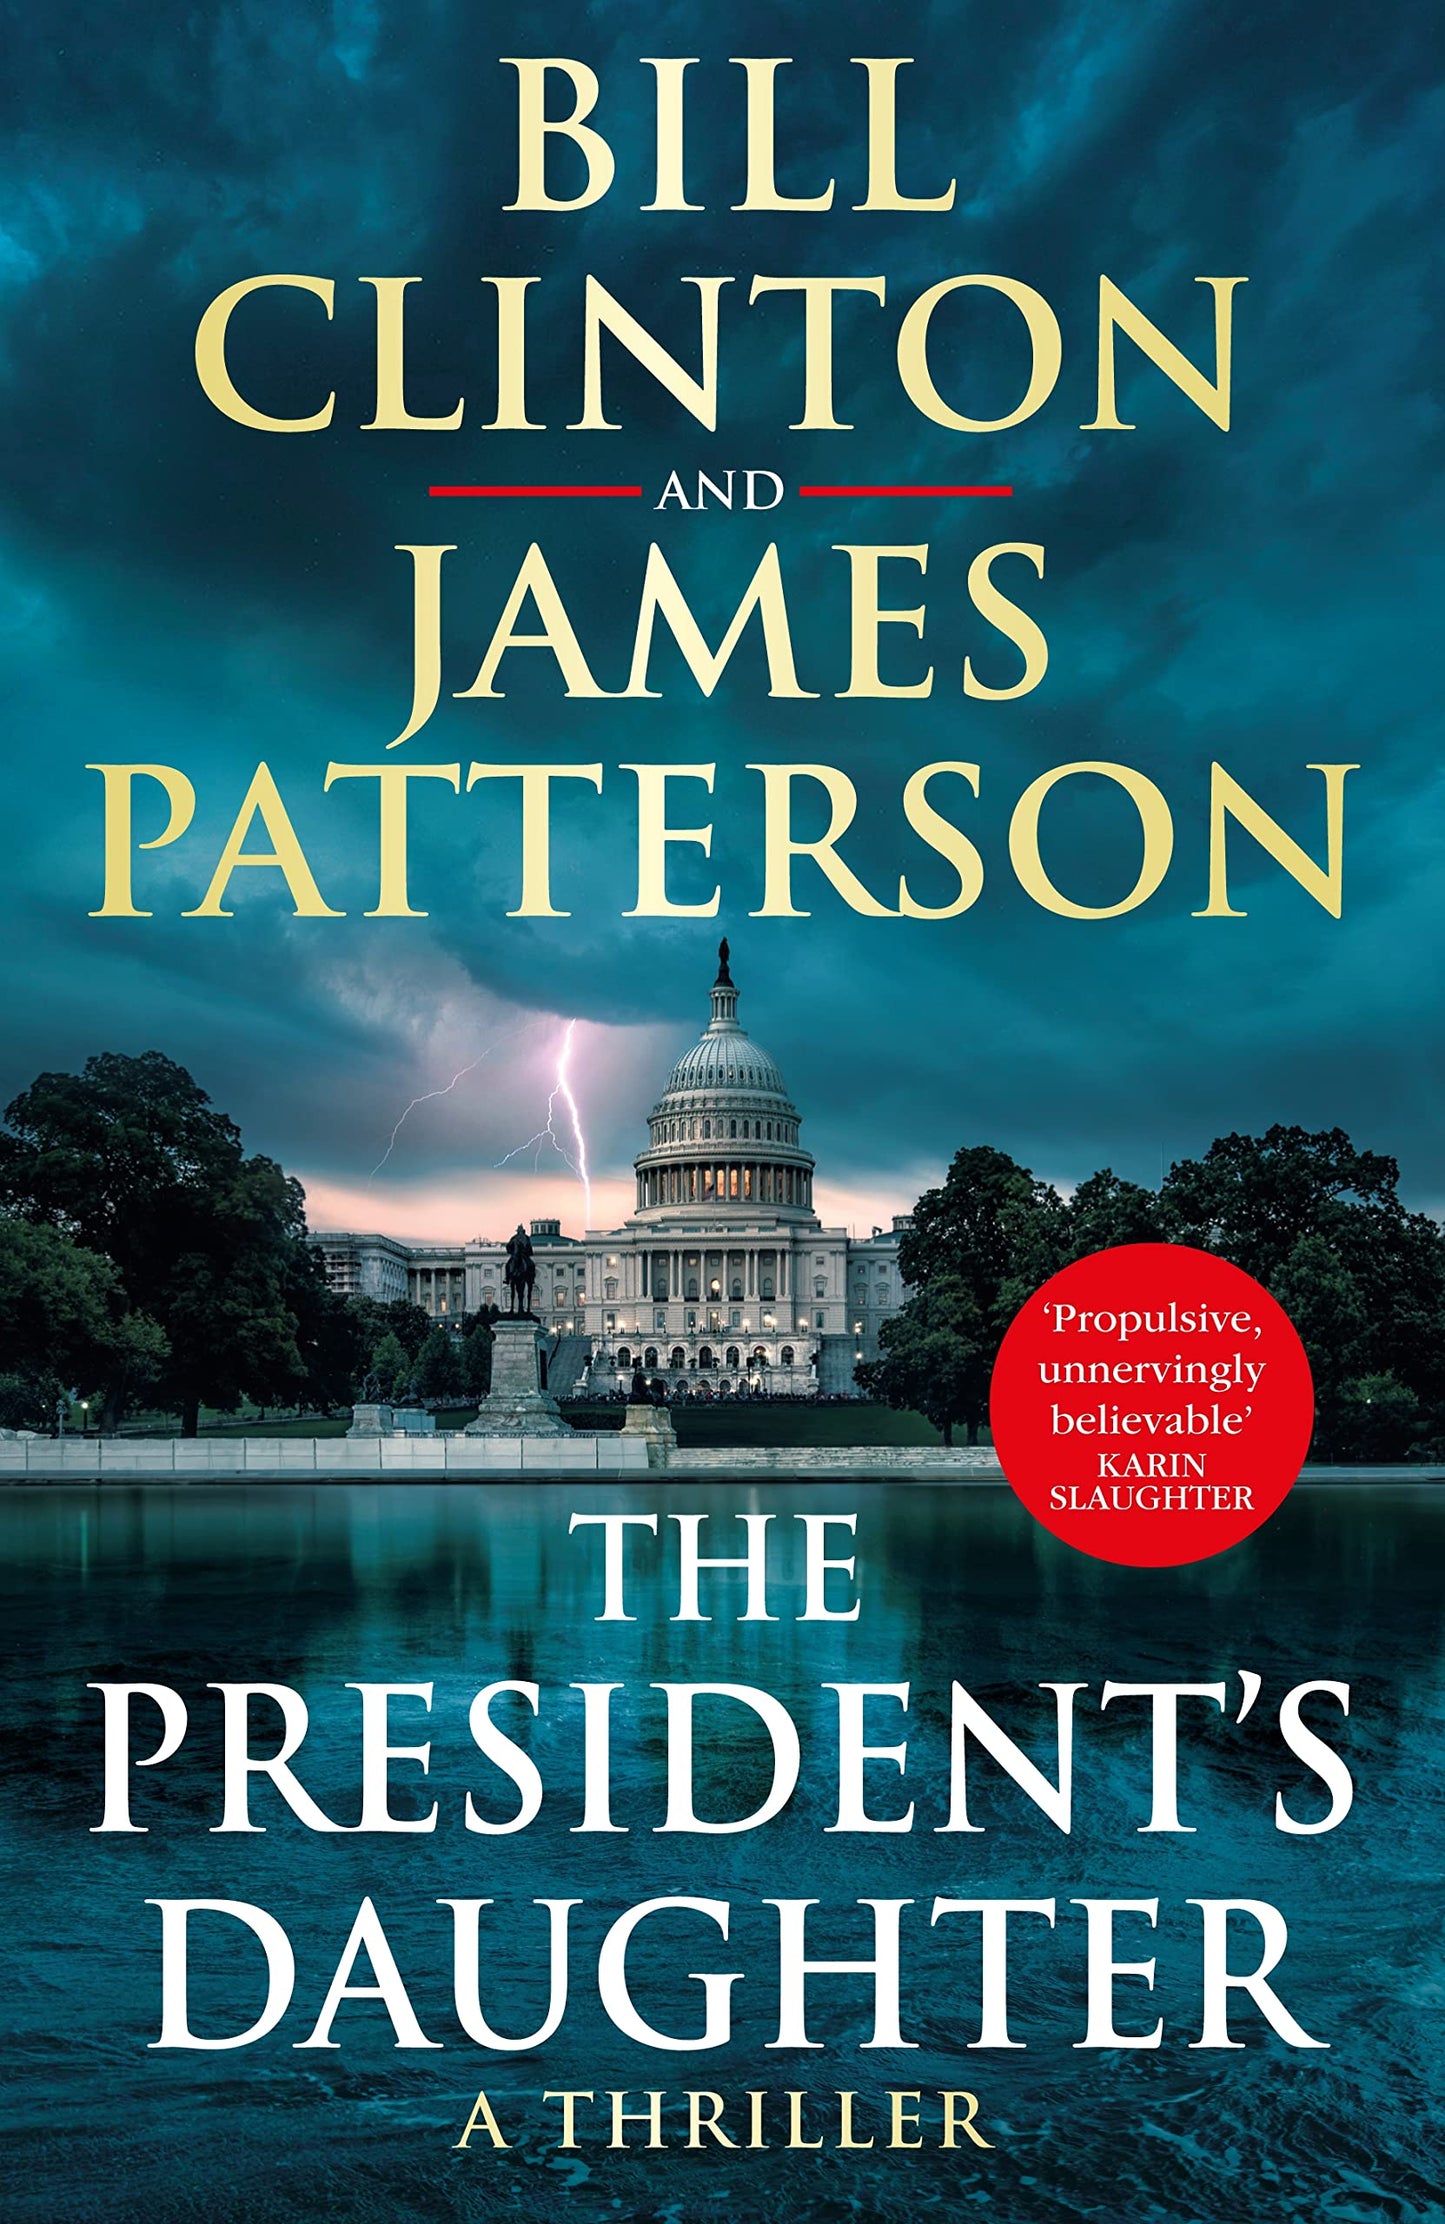 The Presidents Daughter by James Patterson and Bill Clinton